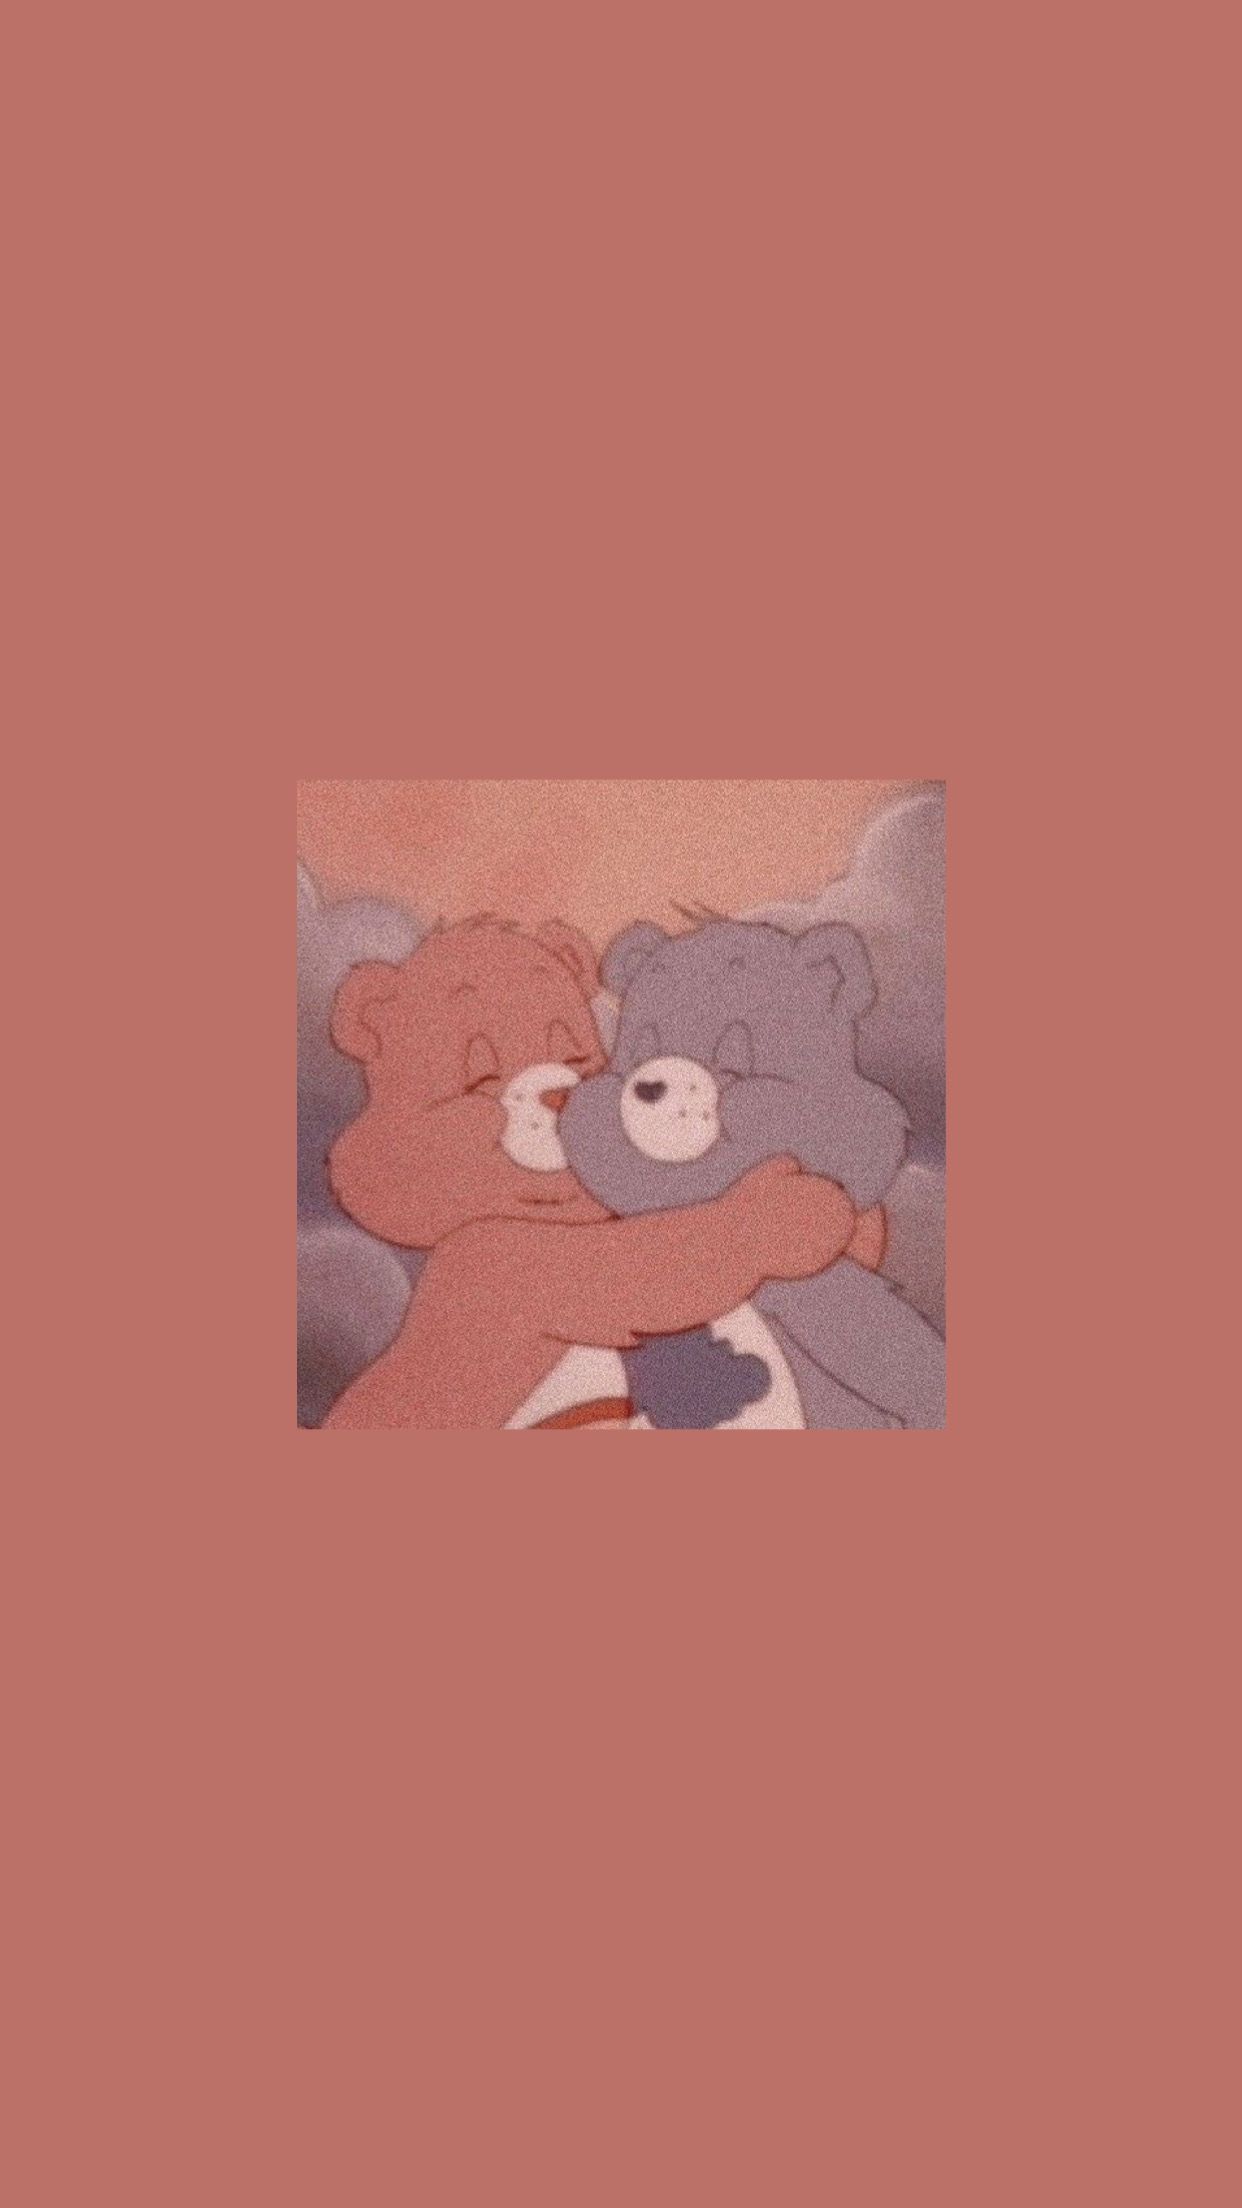 Download Share a Huggable Moment with Aesthetic Care Bear Wallpaper   Wallpaperscom